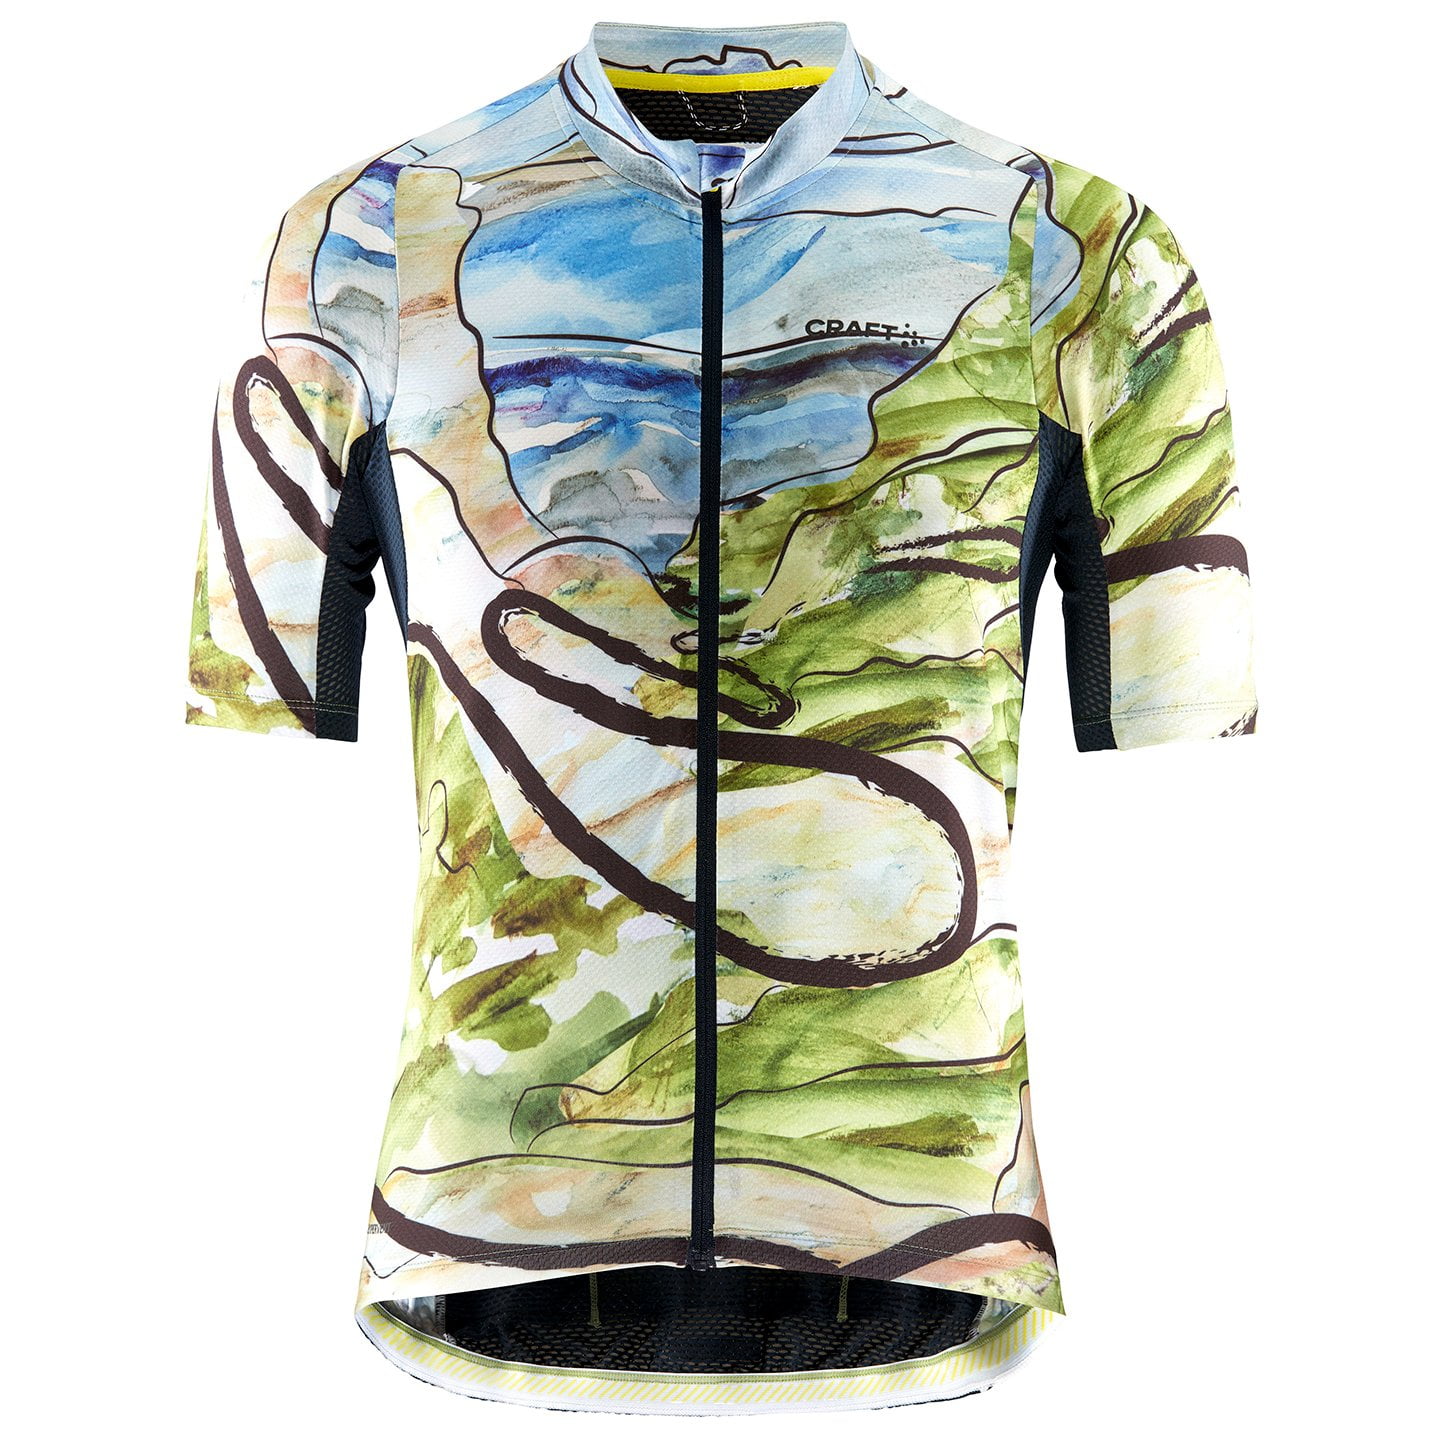 CRAFT ADV Endurance Graphic Short Sleeve Jersey, for men, size S, Cycling jersey, Cycling clothing